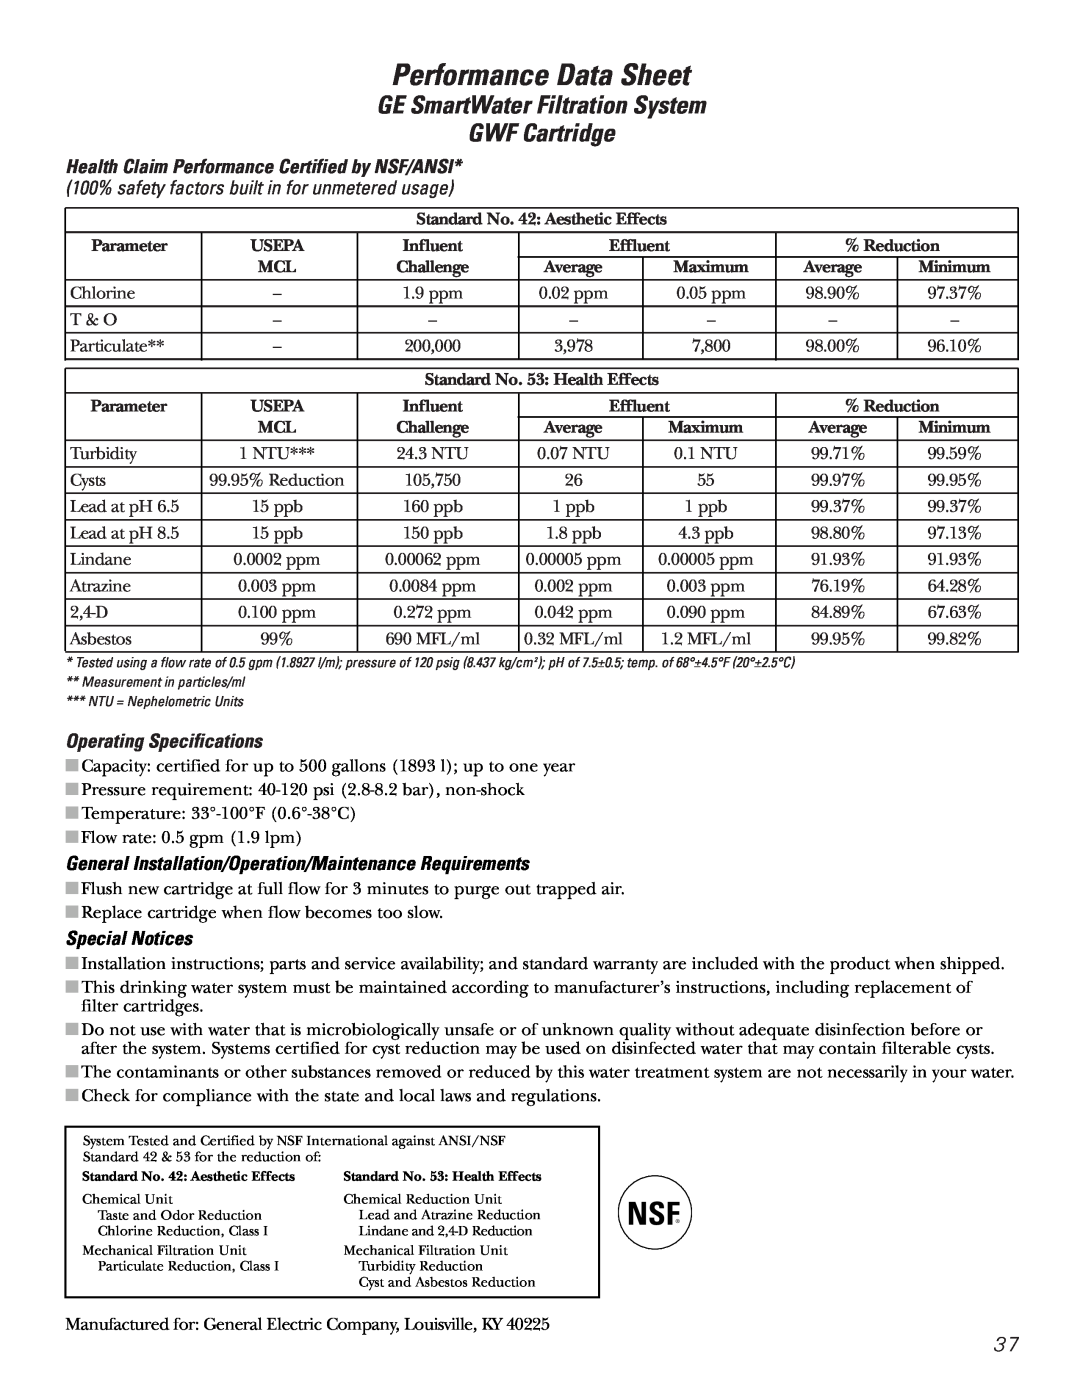 GE Performance Data Sheet, GE SmartWater Filtration System GWF Cartridge, Health Claim Performance Certified by NSF/ANSI 